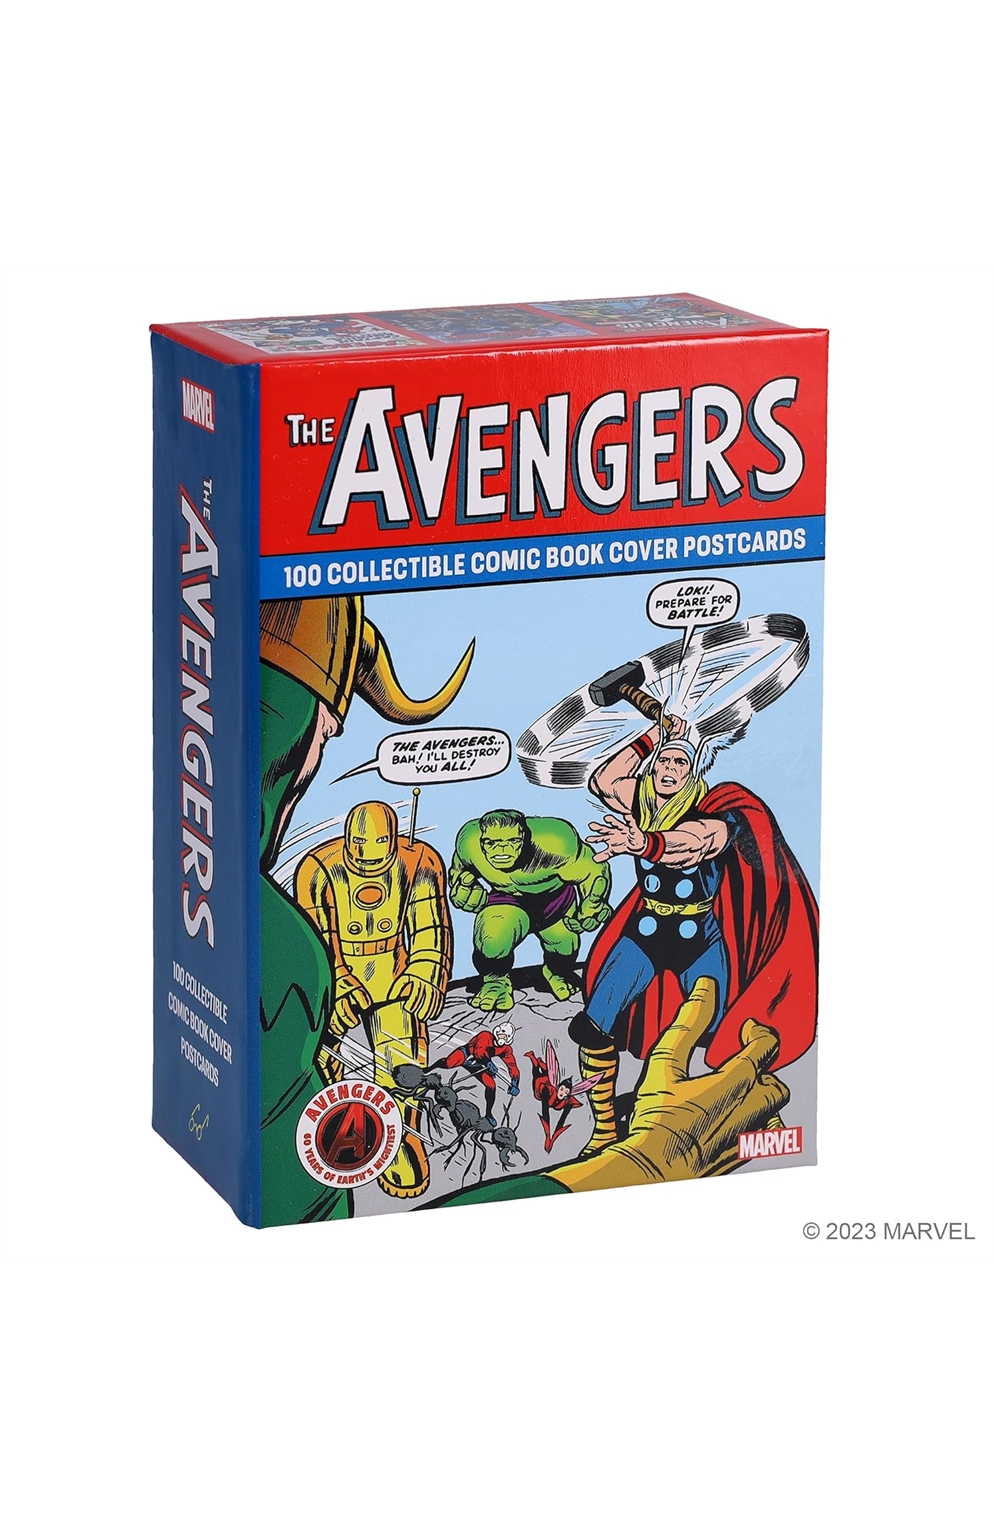 Avengers: 100 Collectible Comic Book Cover Postcards